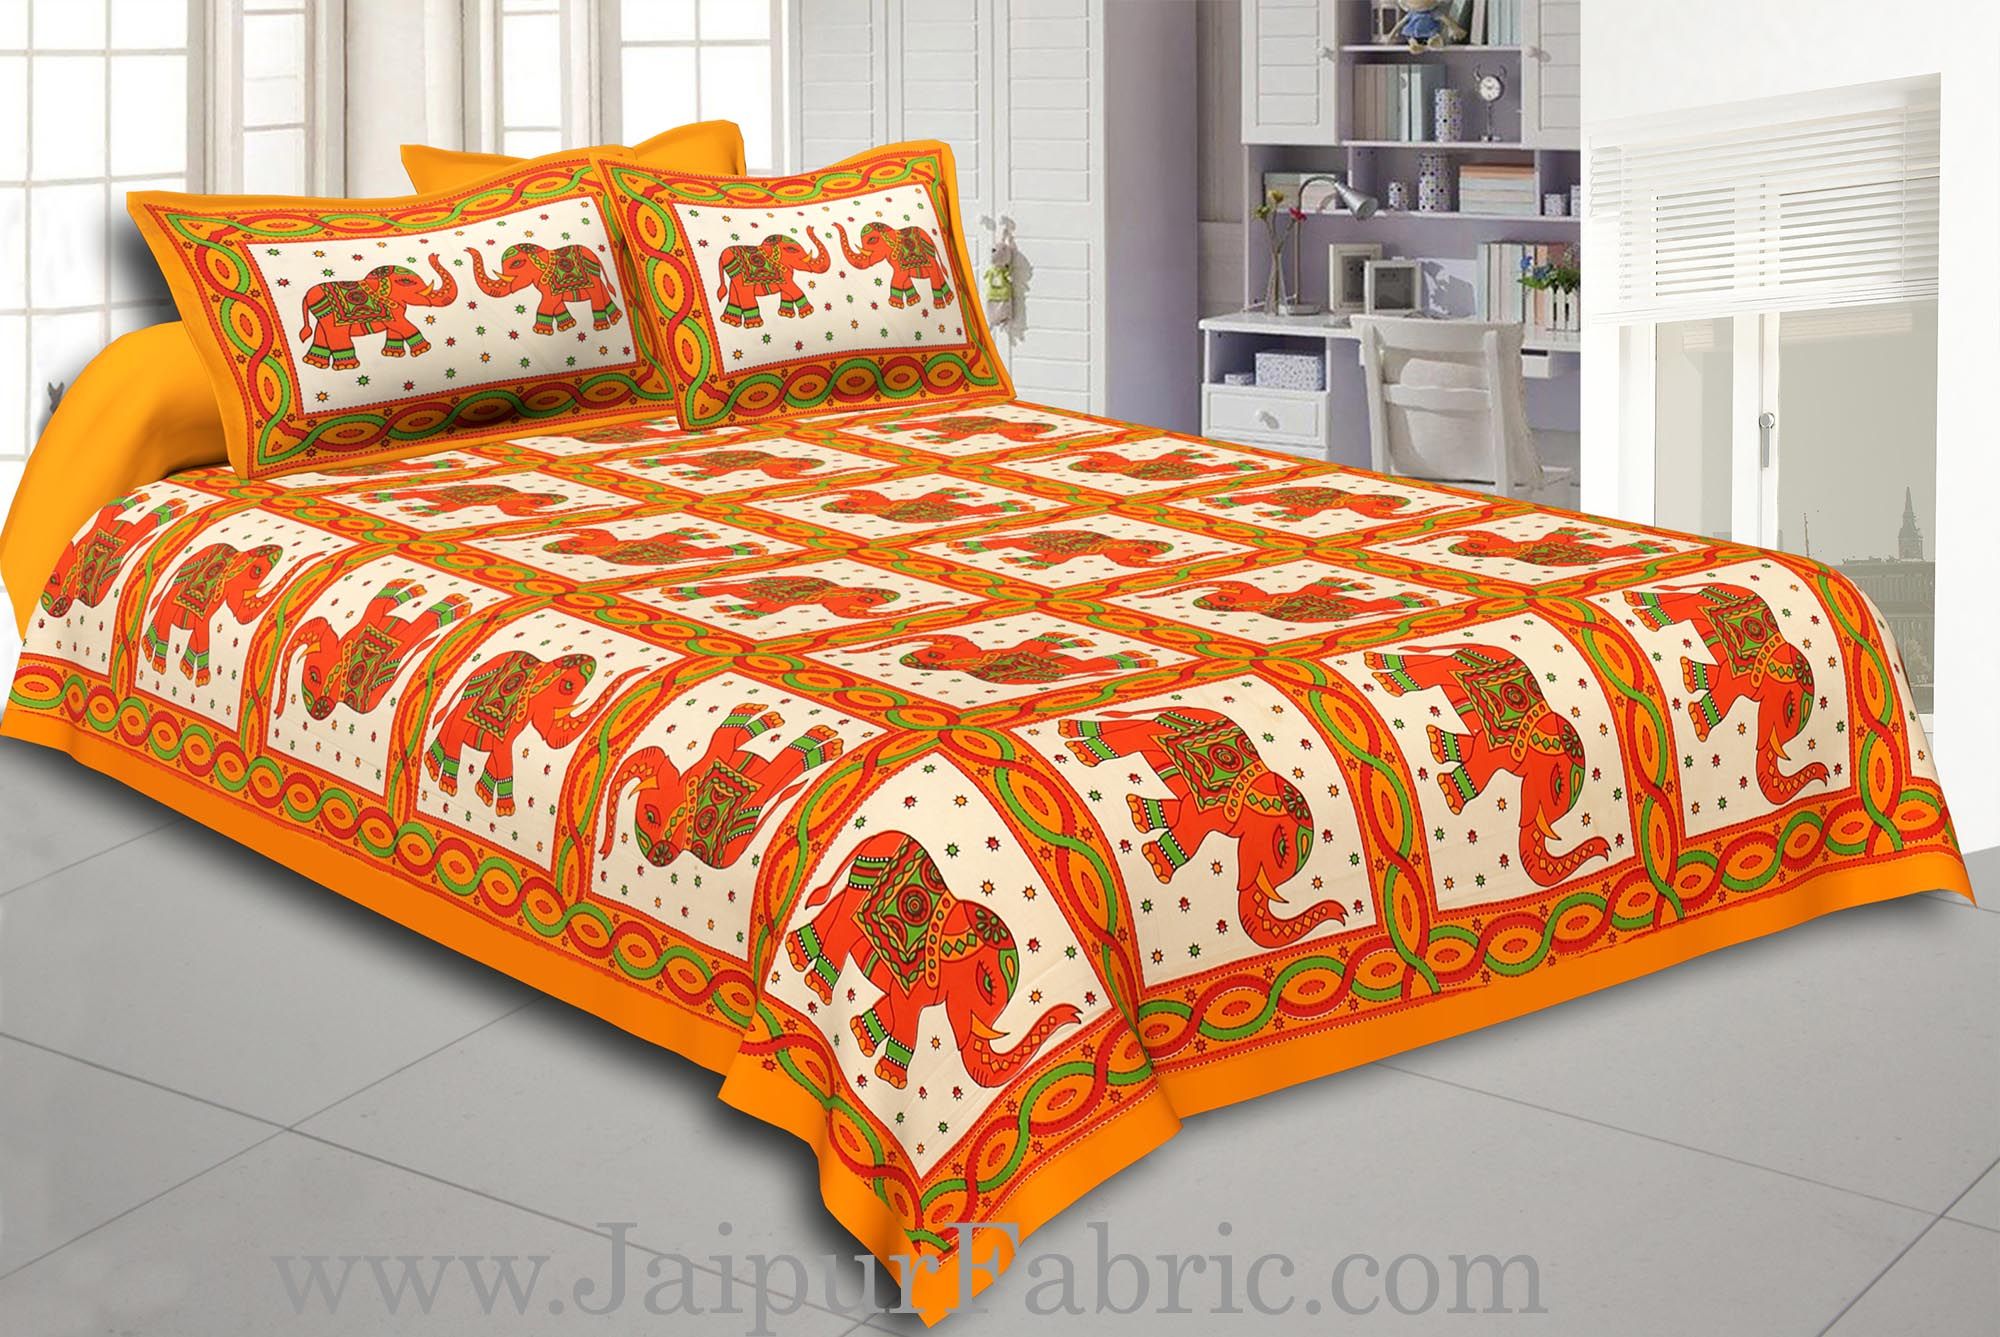 Yellow Border Elephant Design Pure Cotton Double Bedsheet With Pillow Cover